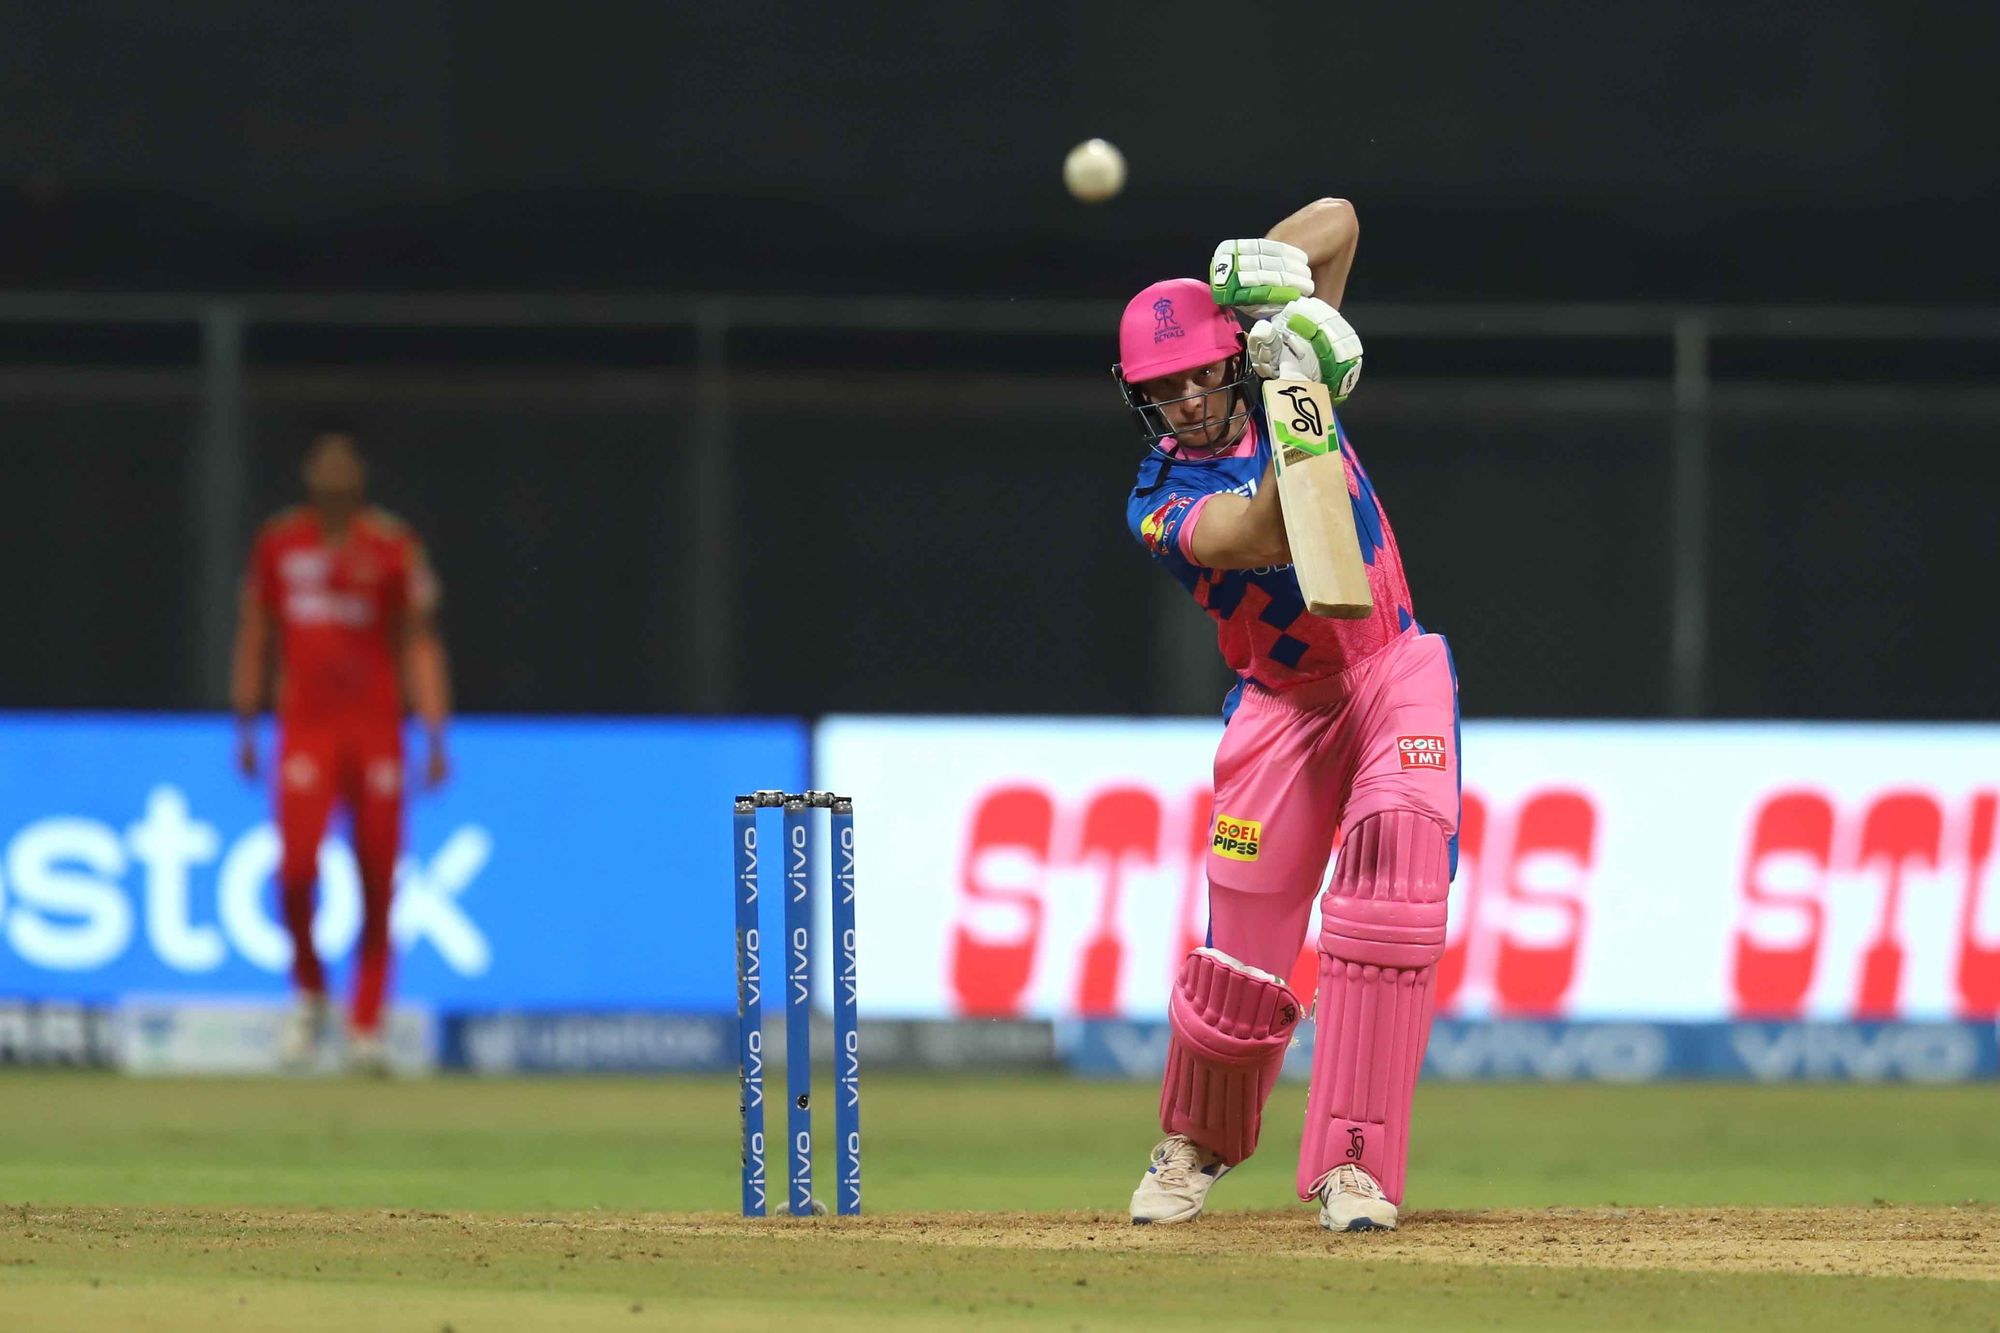 IPL 2021 Playoffs | Jos Buttler has the character and personality to captain Virat Kohli and RCB, opines Michael Vaughan